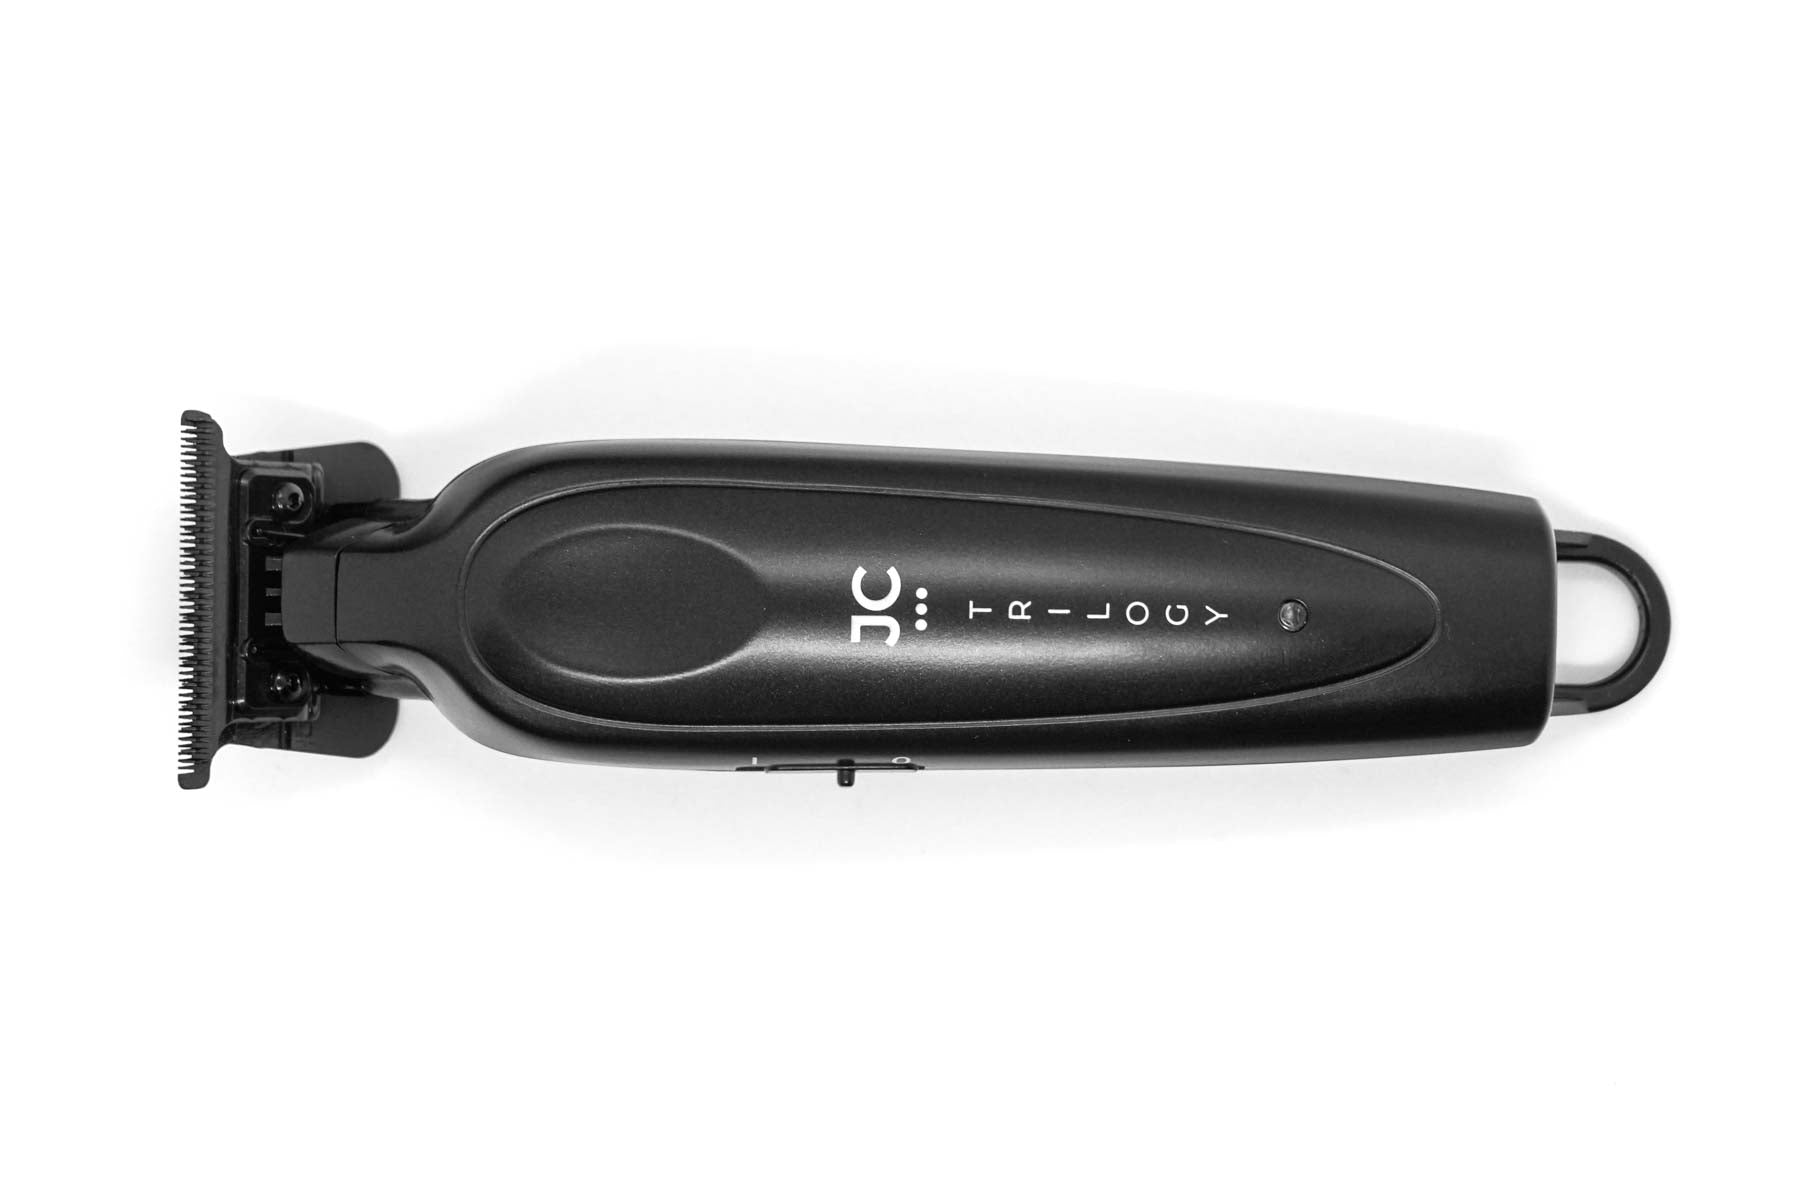 JC TRILOGY Ultimate Professional Clipper & Trimmer Duo